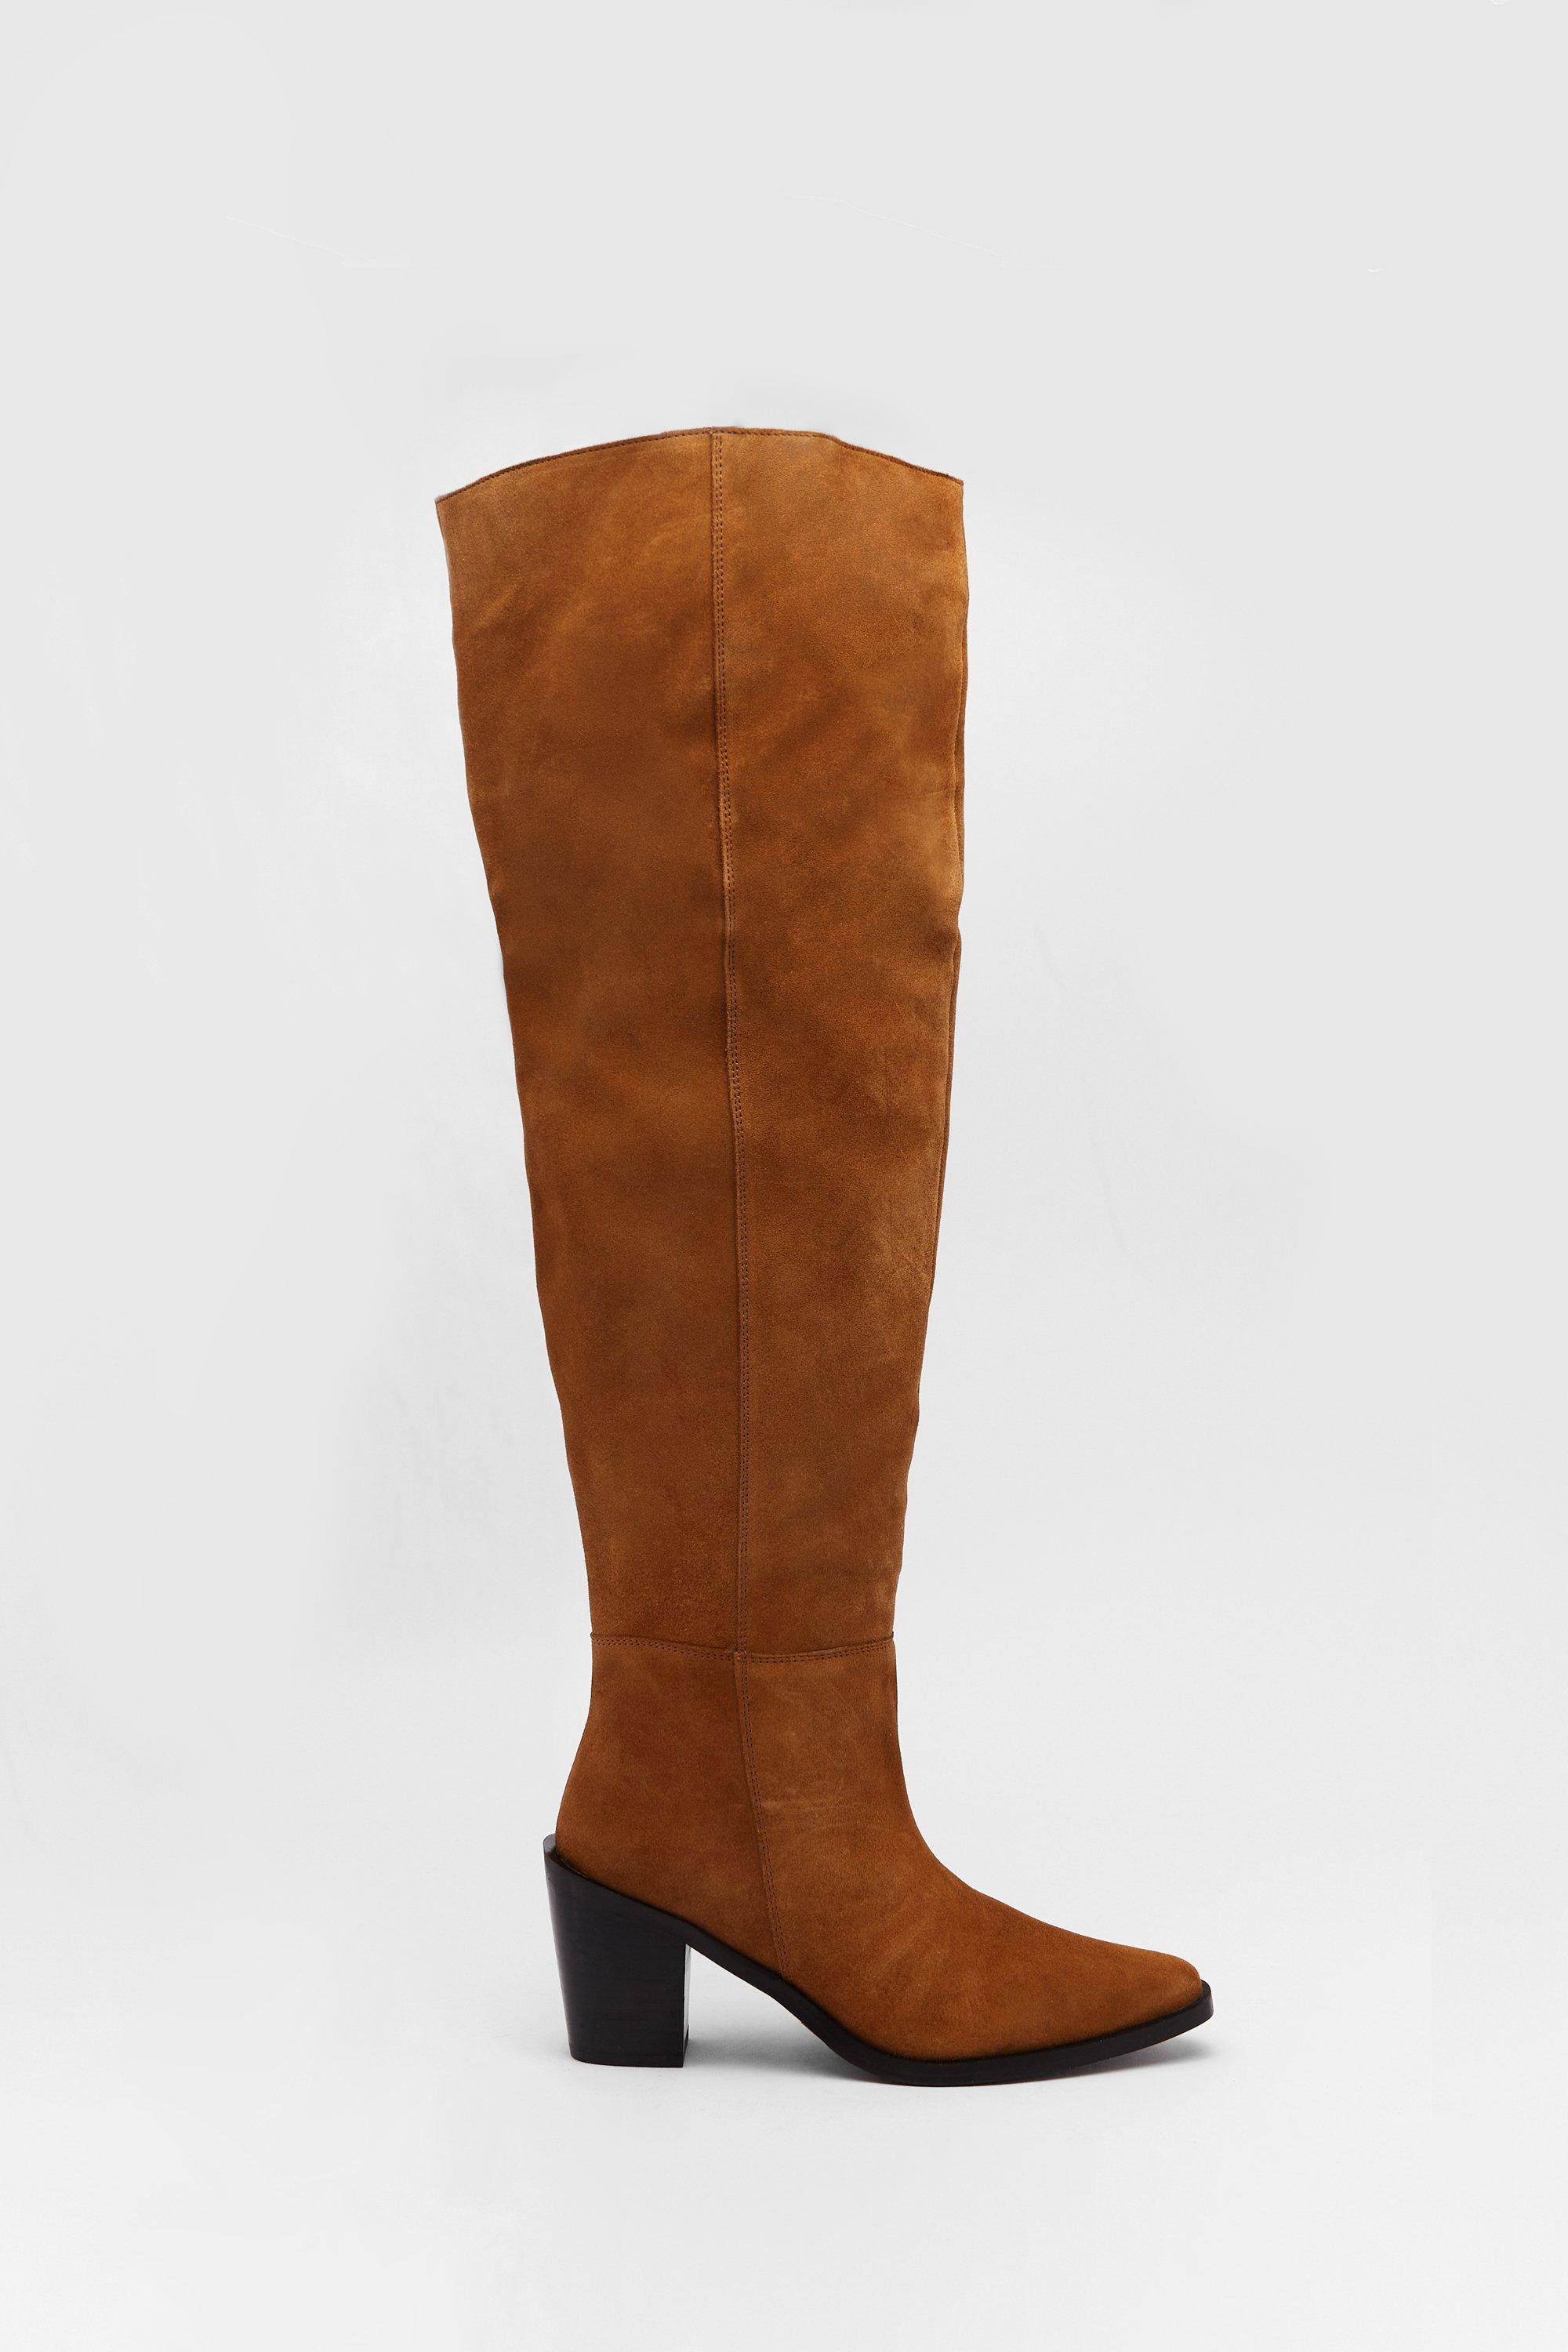 Womens Real Suede Slouchy Knee High Boots - tan